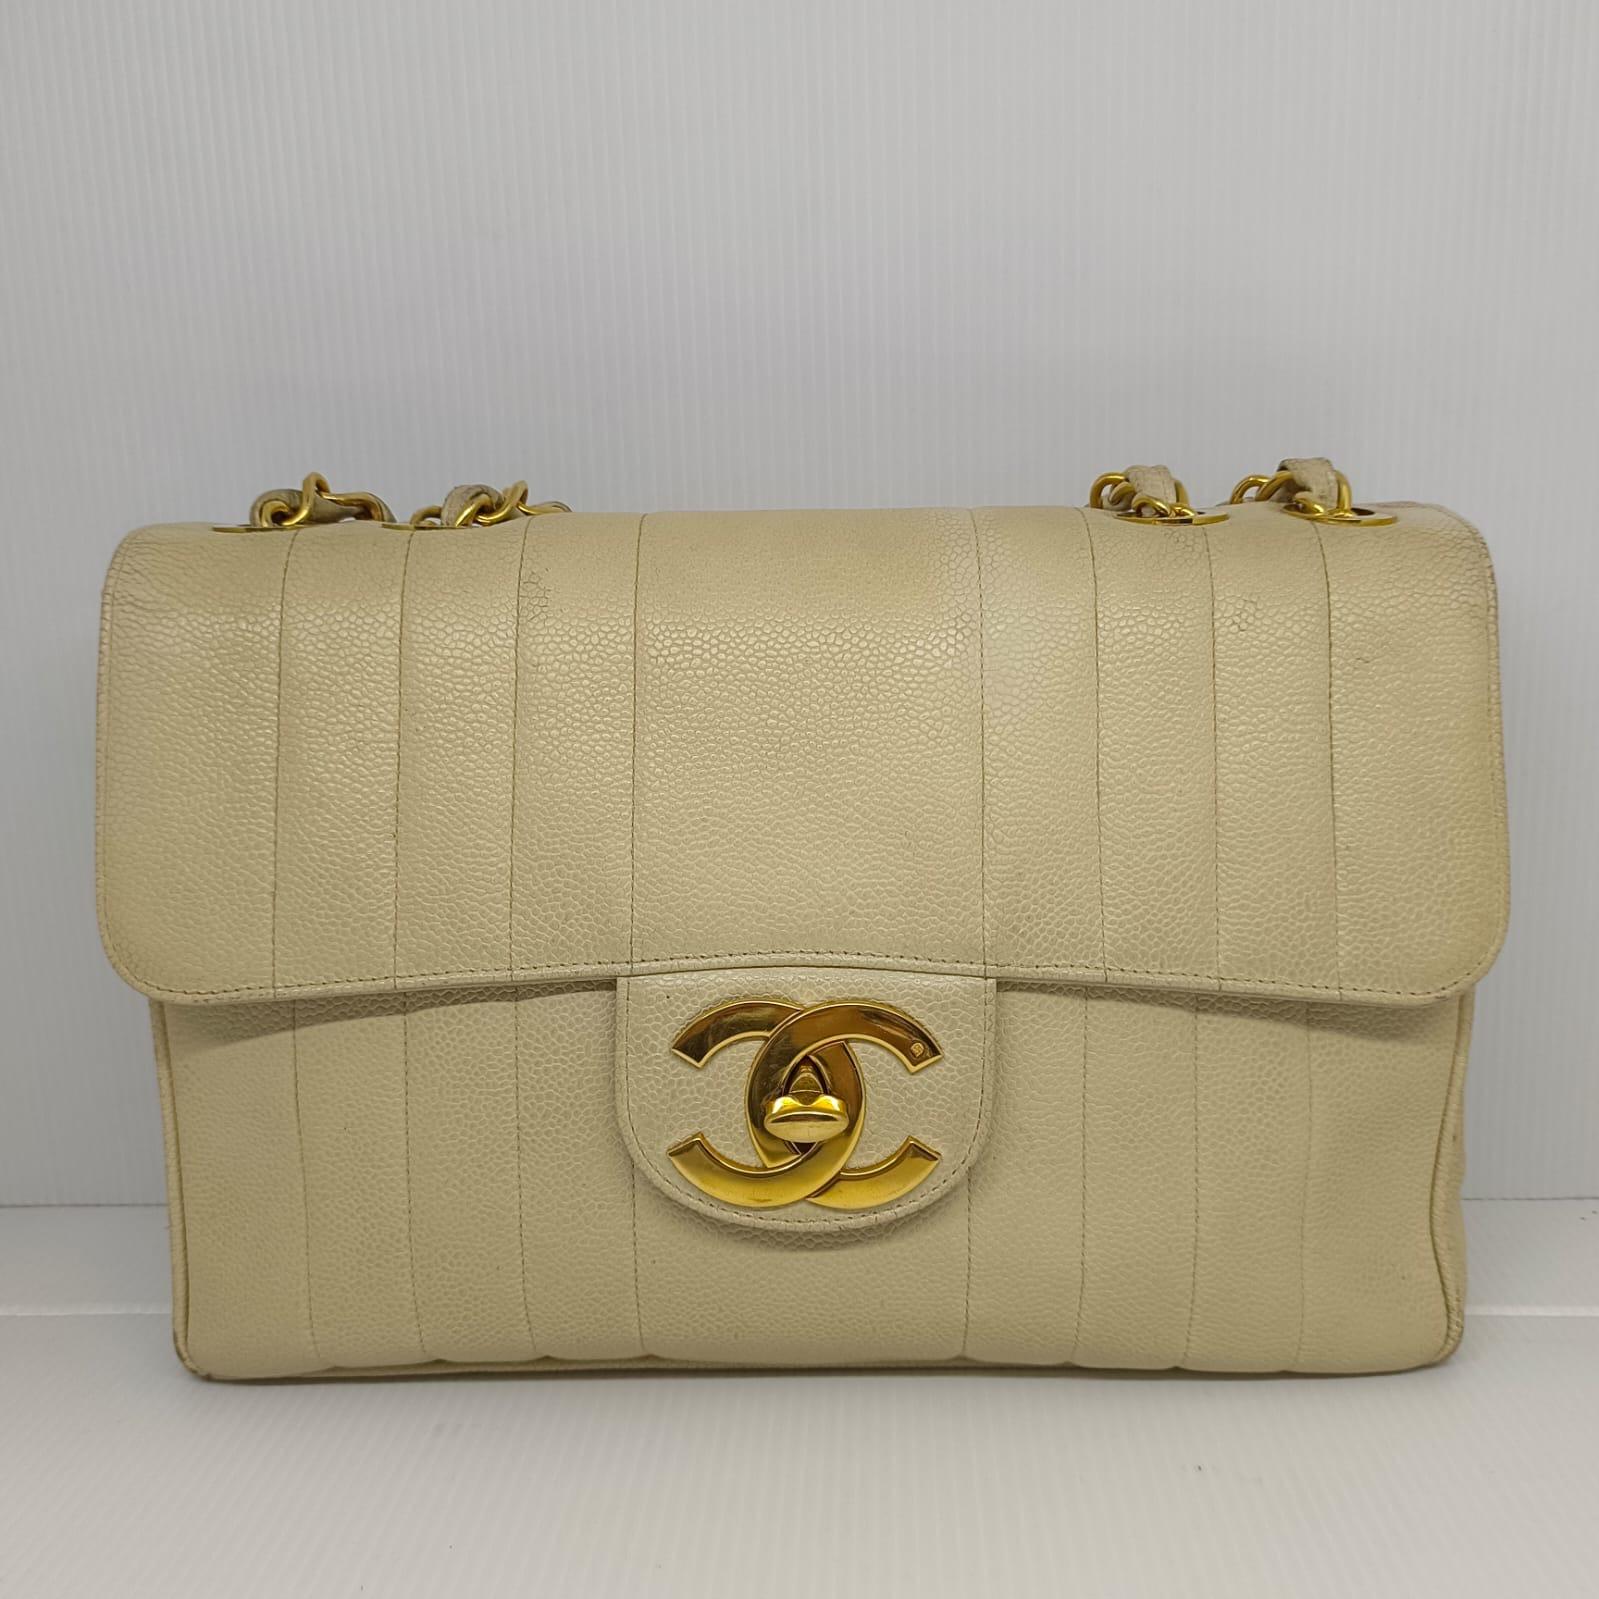 Rare chanel vintage jumbo vertical quilted bag in off white caviar leather with 24k gold hardware. In worn condition, with faint dirt marks on the leather surface. Corners shows visible rubbing marks and minor pen marks on the leather lining. Series